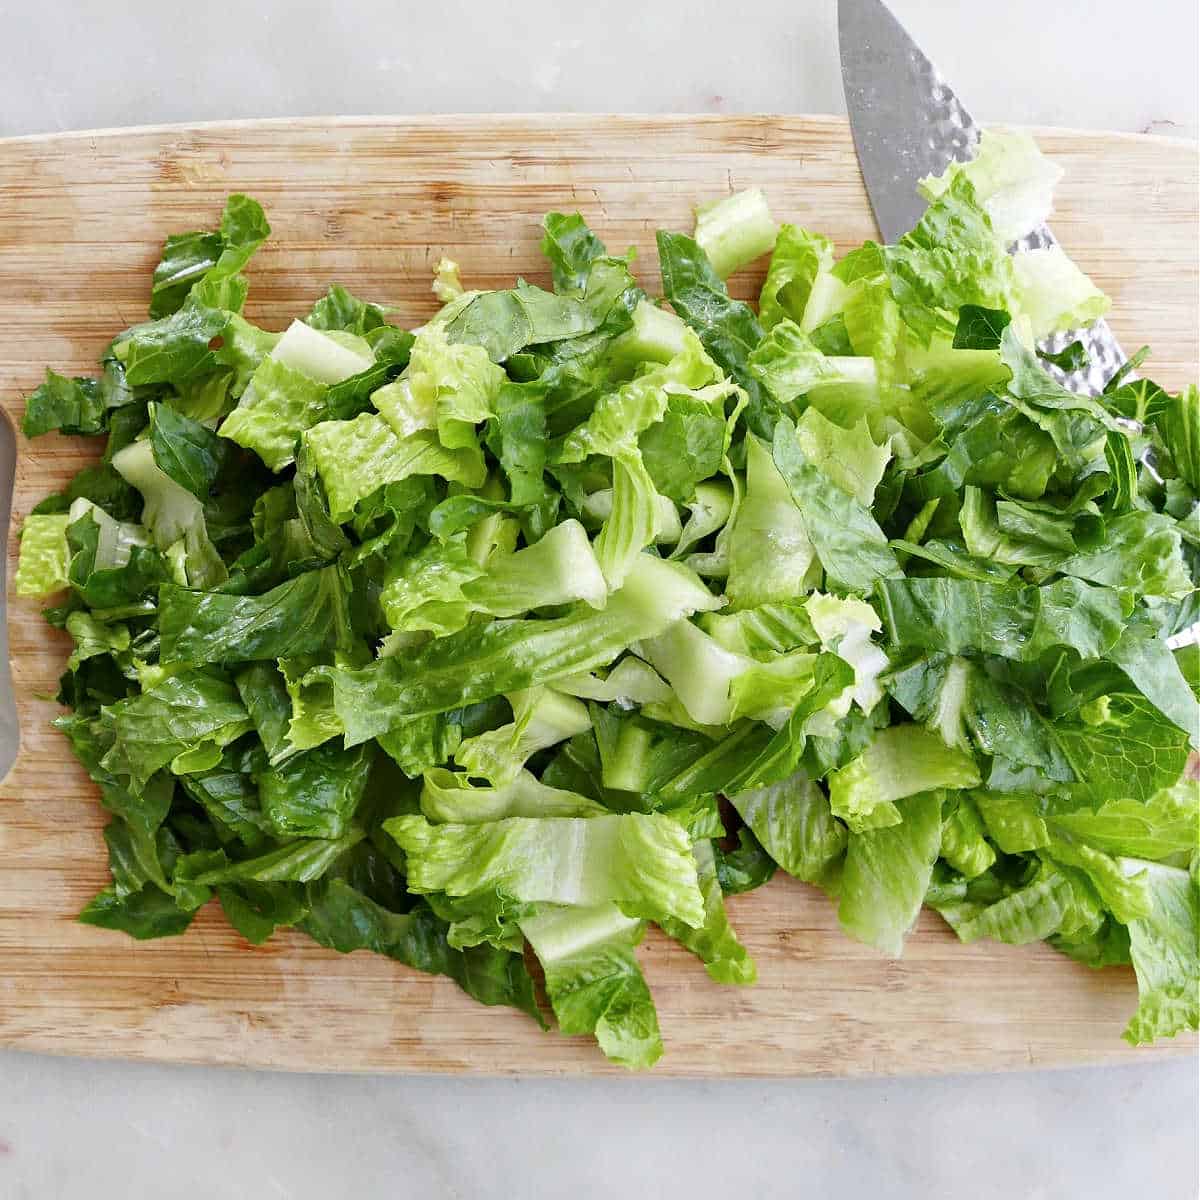 romaine chopped into pieces on a bamboo cutting board